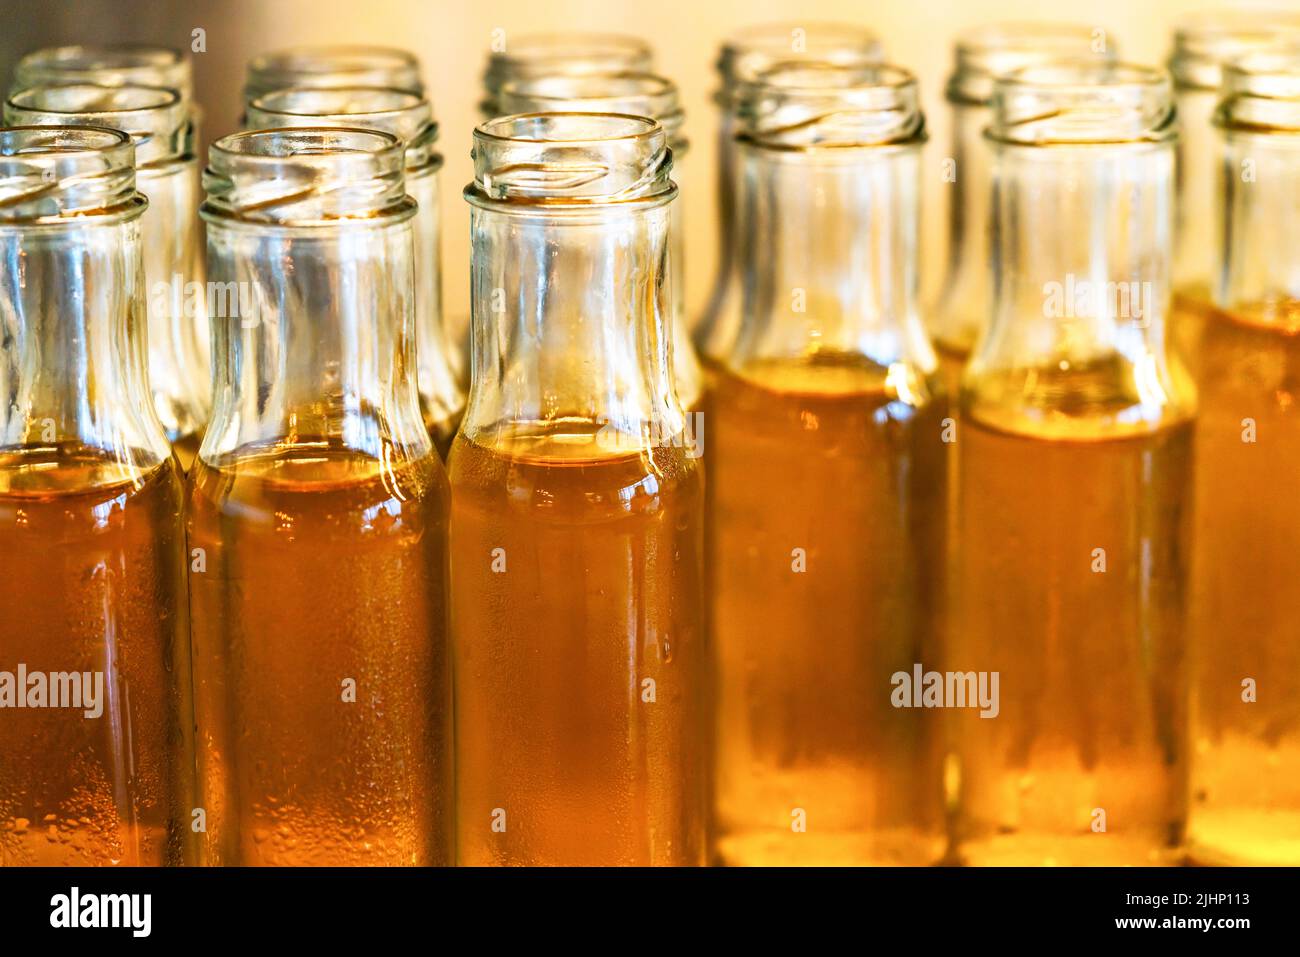 Close up small bottle glass of fresh Chrysanthemum tea, group of cold Chrysanthemum tea in cleared bottles, water drops on bottles, warm light. Stock Photo